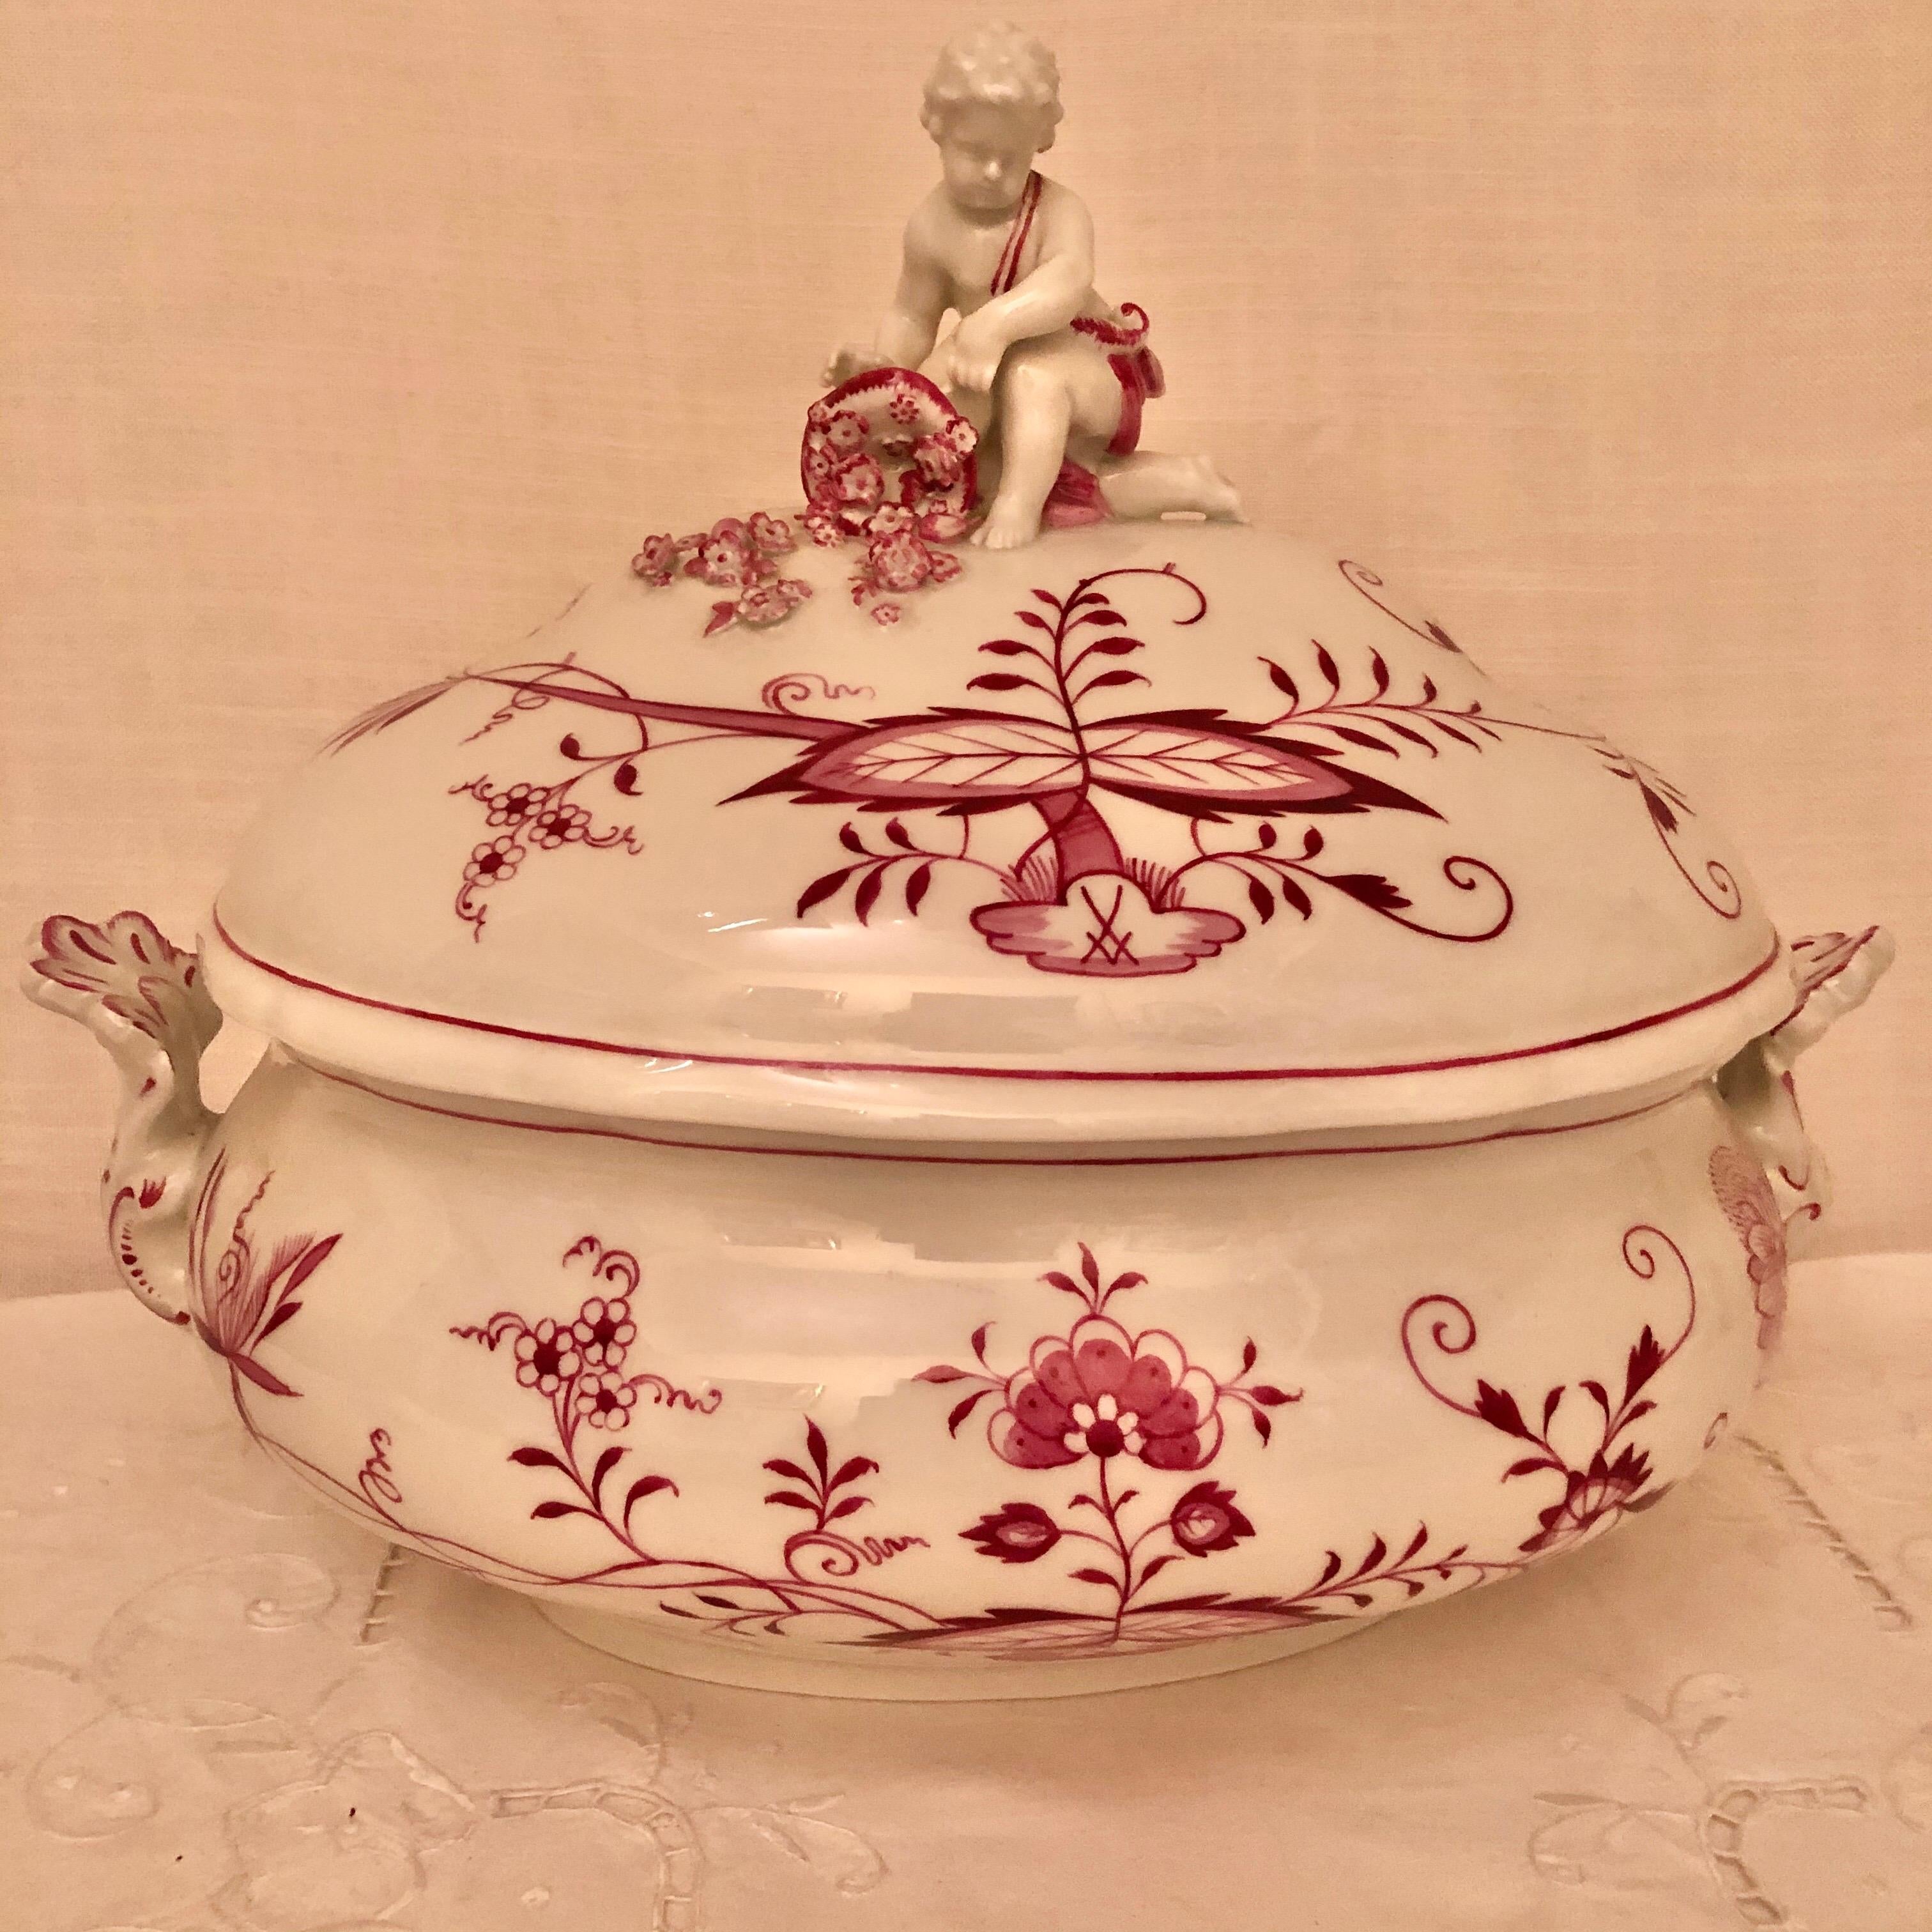 We are proud to offer you this rare Meissen pink onion dinner service having 66 pieces. It is essentially a service for twelve with many serving pieces. However, we only have 11 cups and saucers. Over the past thirty years, I have only seen one